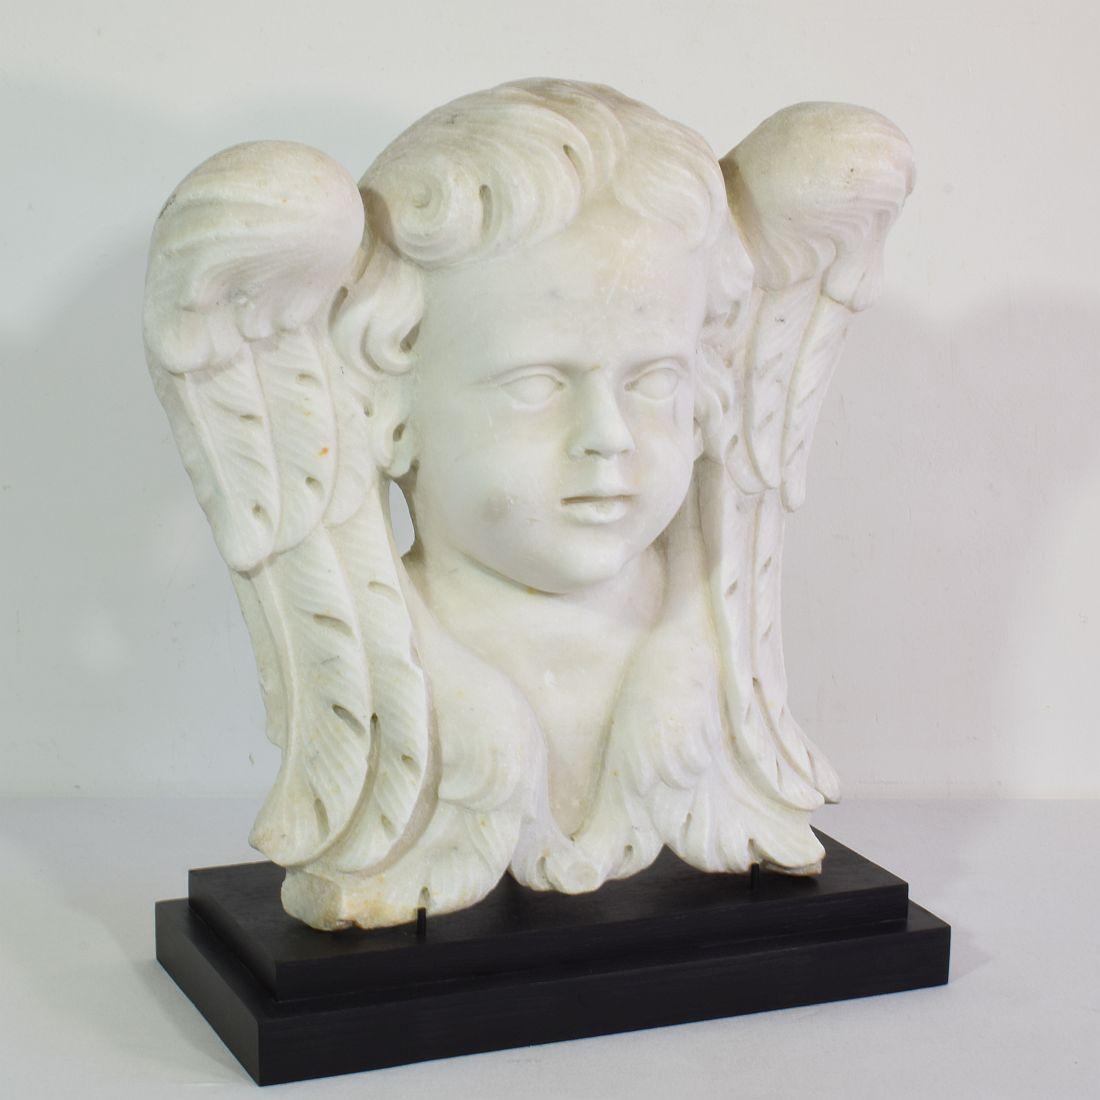 Baroque Italian, 17th / 18th Century Carved White Marble Winged Angel Head Ornament For Sale